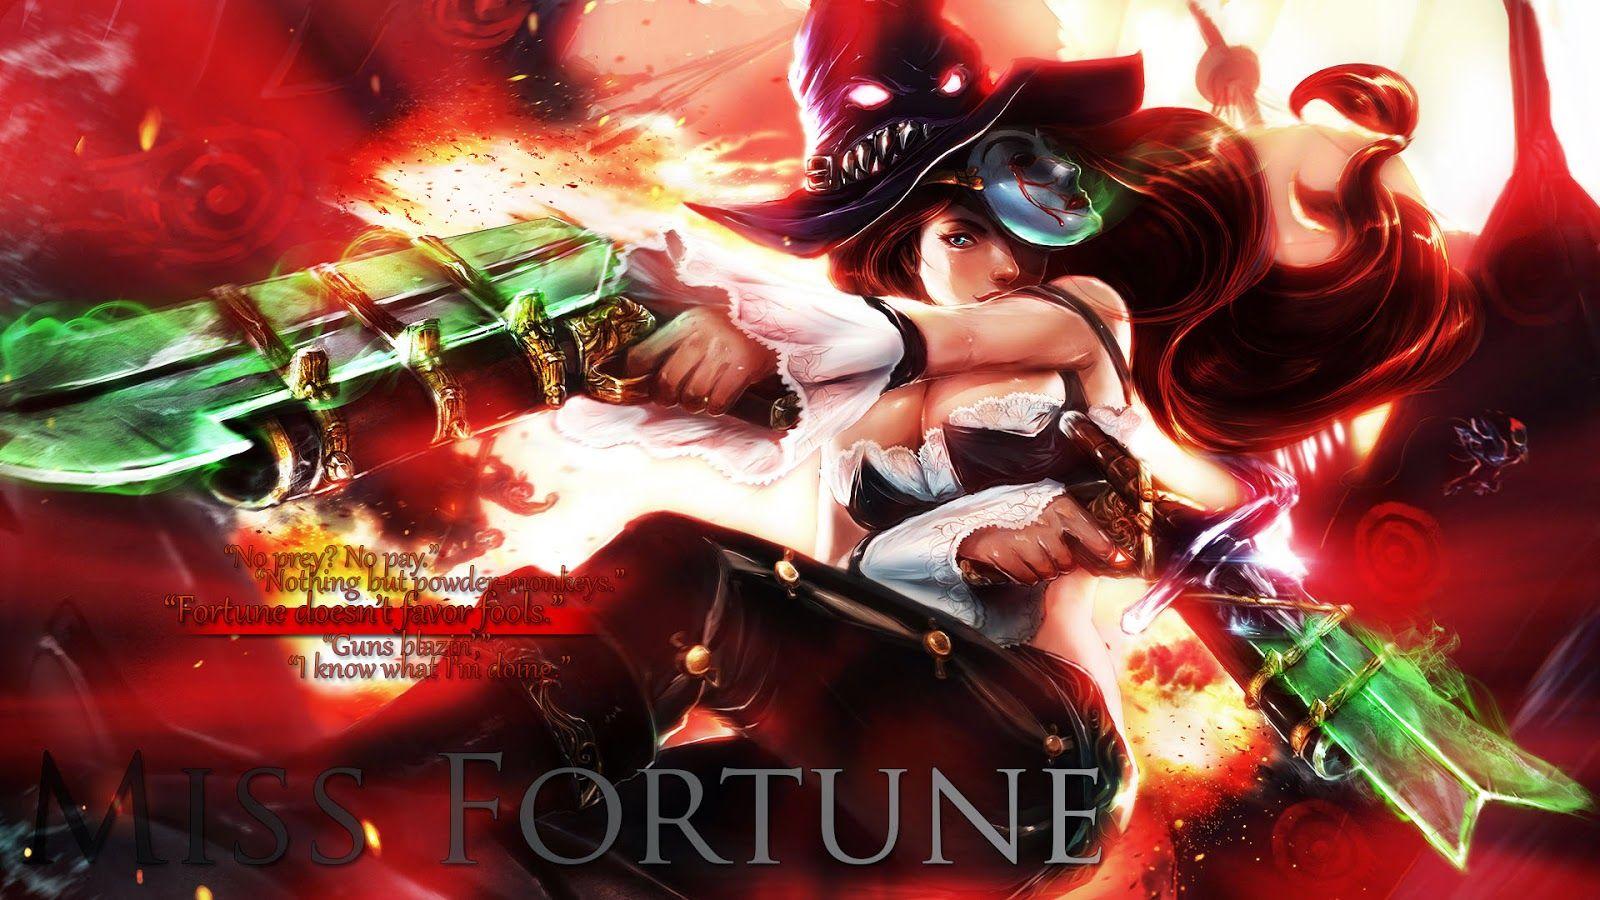 Miss Fortune Wallpapers Hd Wallpaper Cave